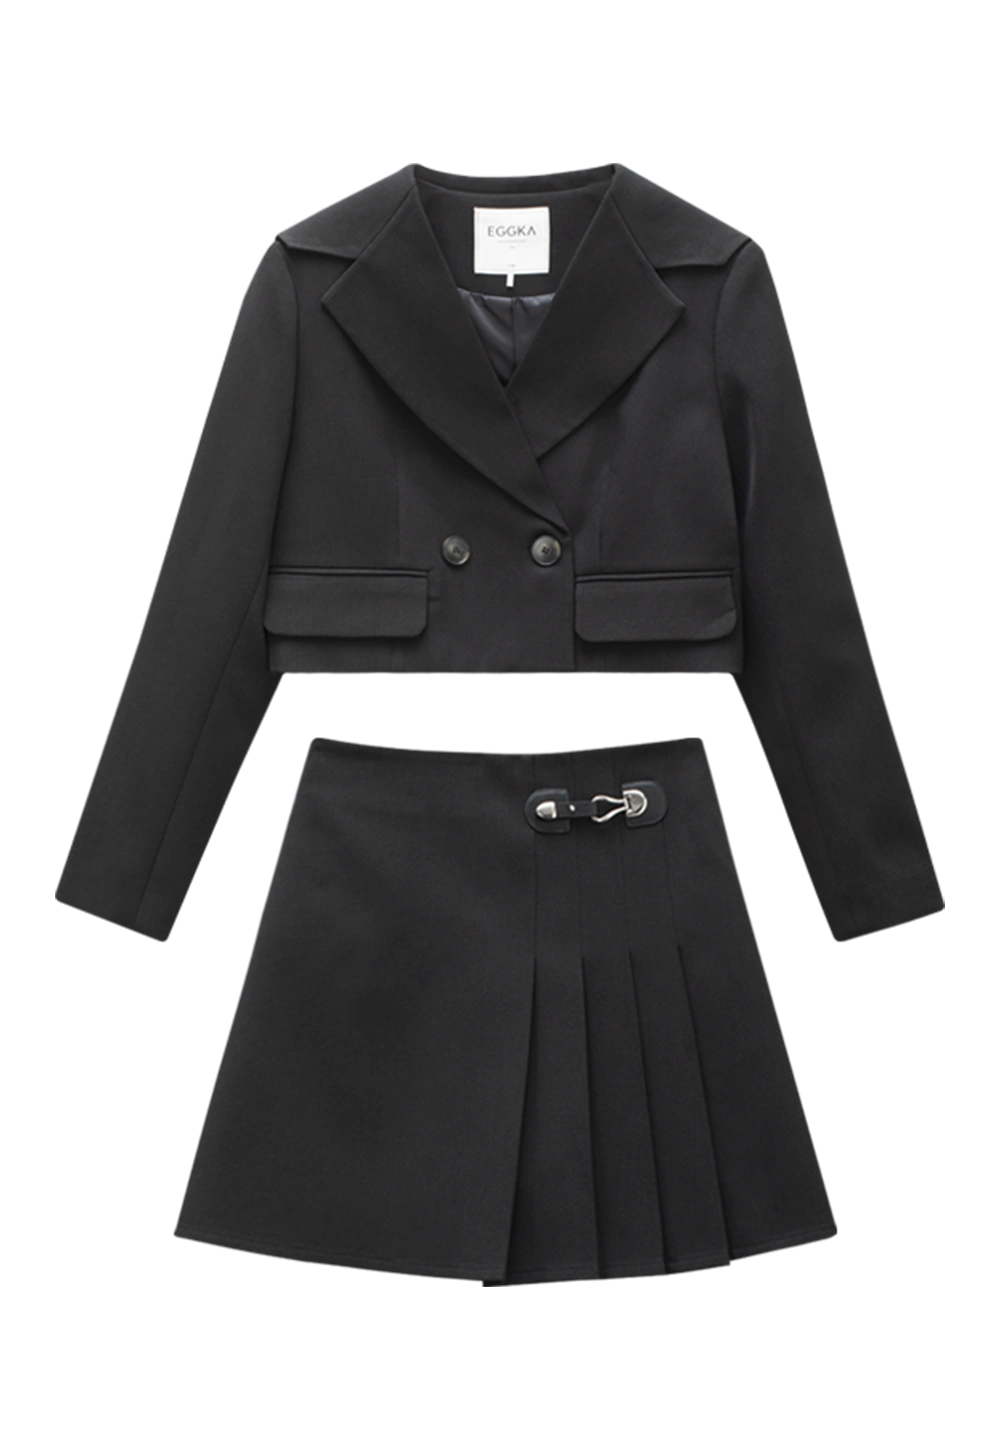 Women's Blazer and Pleated Skirt Set with Silver Buckle Detail